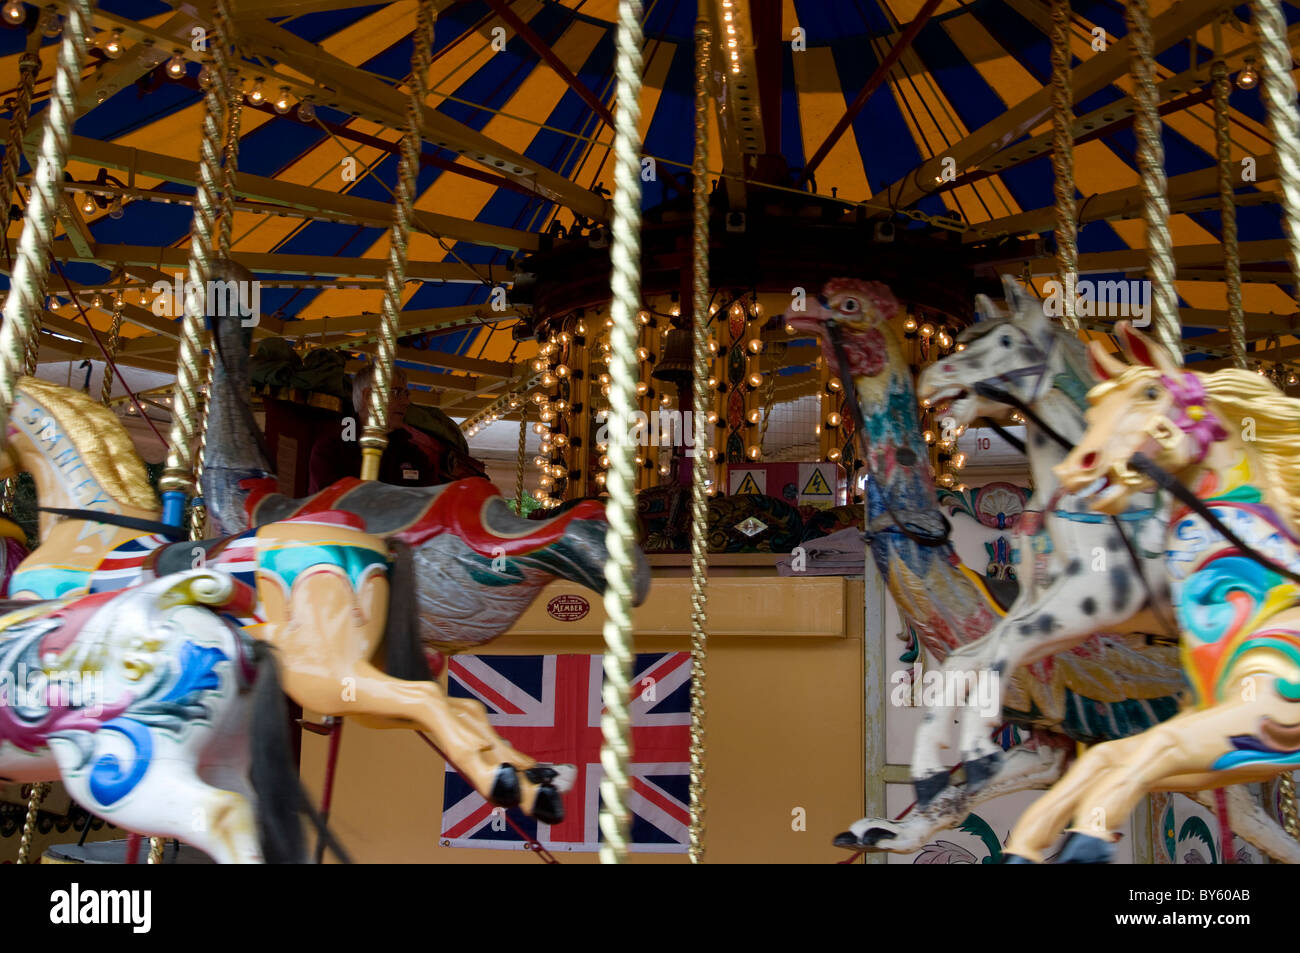 Gallopers fairground roundabout at Bressingham Steam Museum in Norfolk, England. Stock Photo